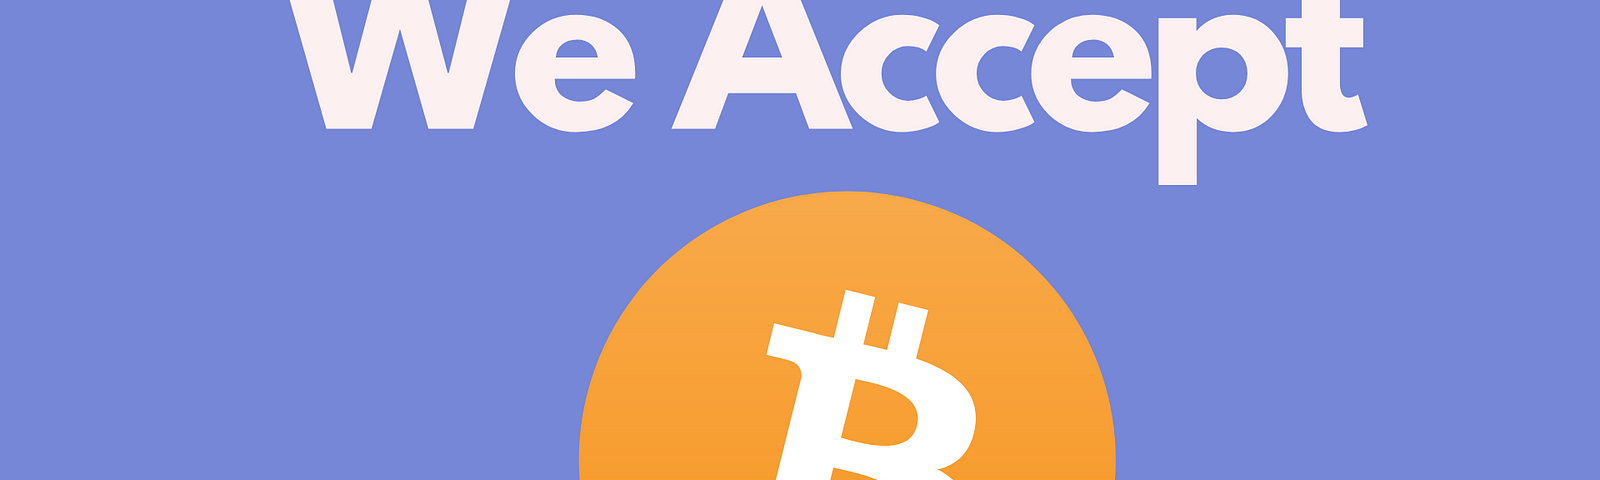 We Accept Bitcoins here